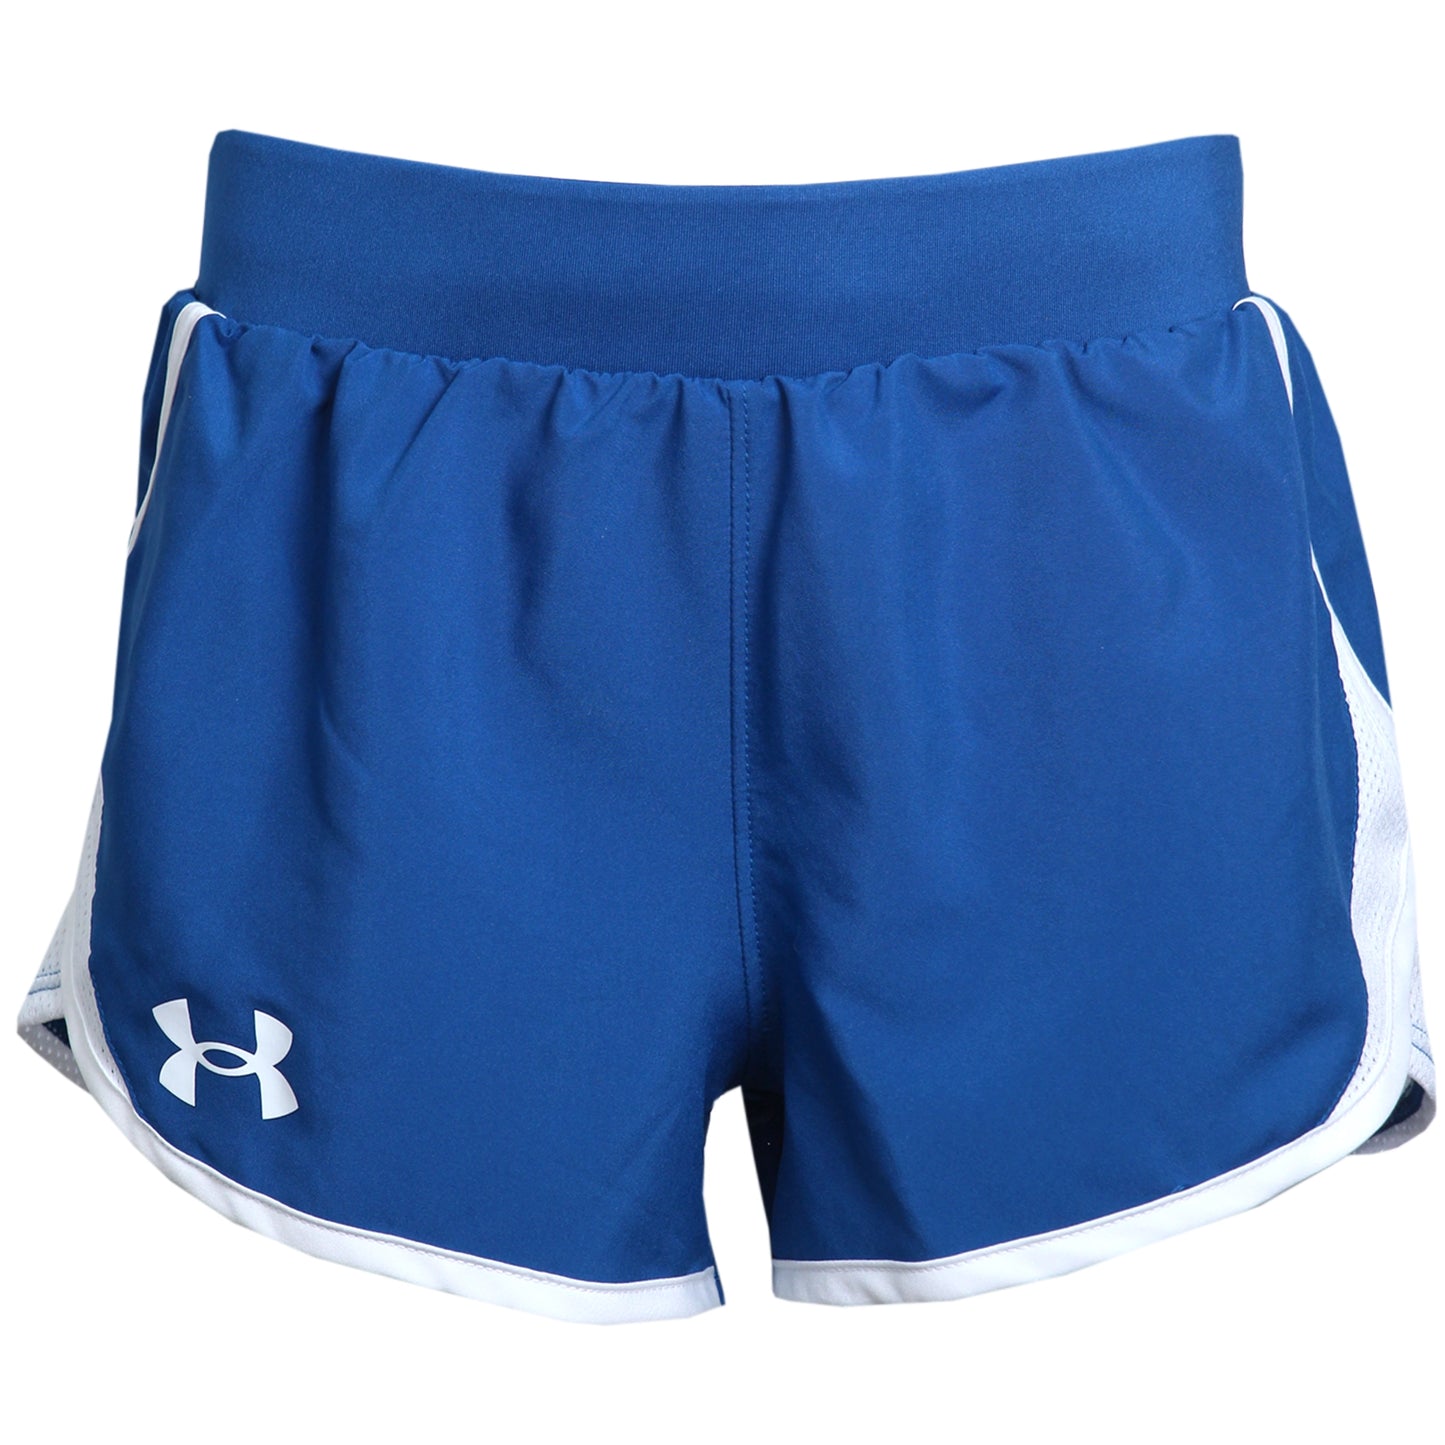  Under Armour Girls Fly by Shorts, (426) Varsity Blue